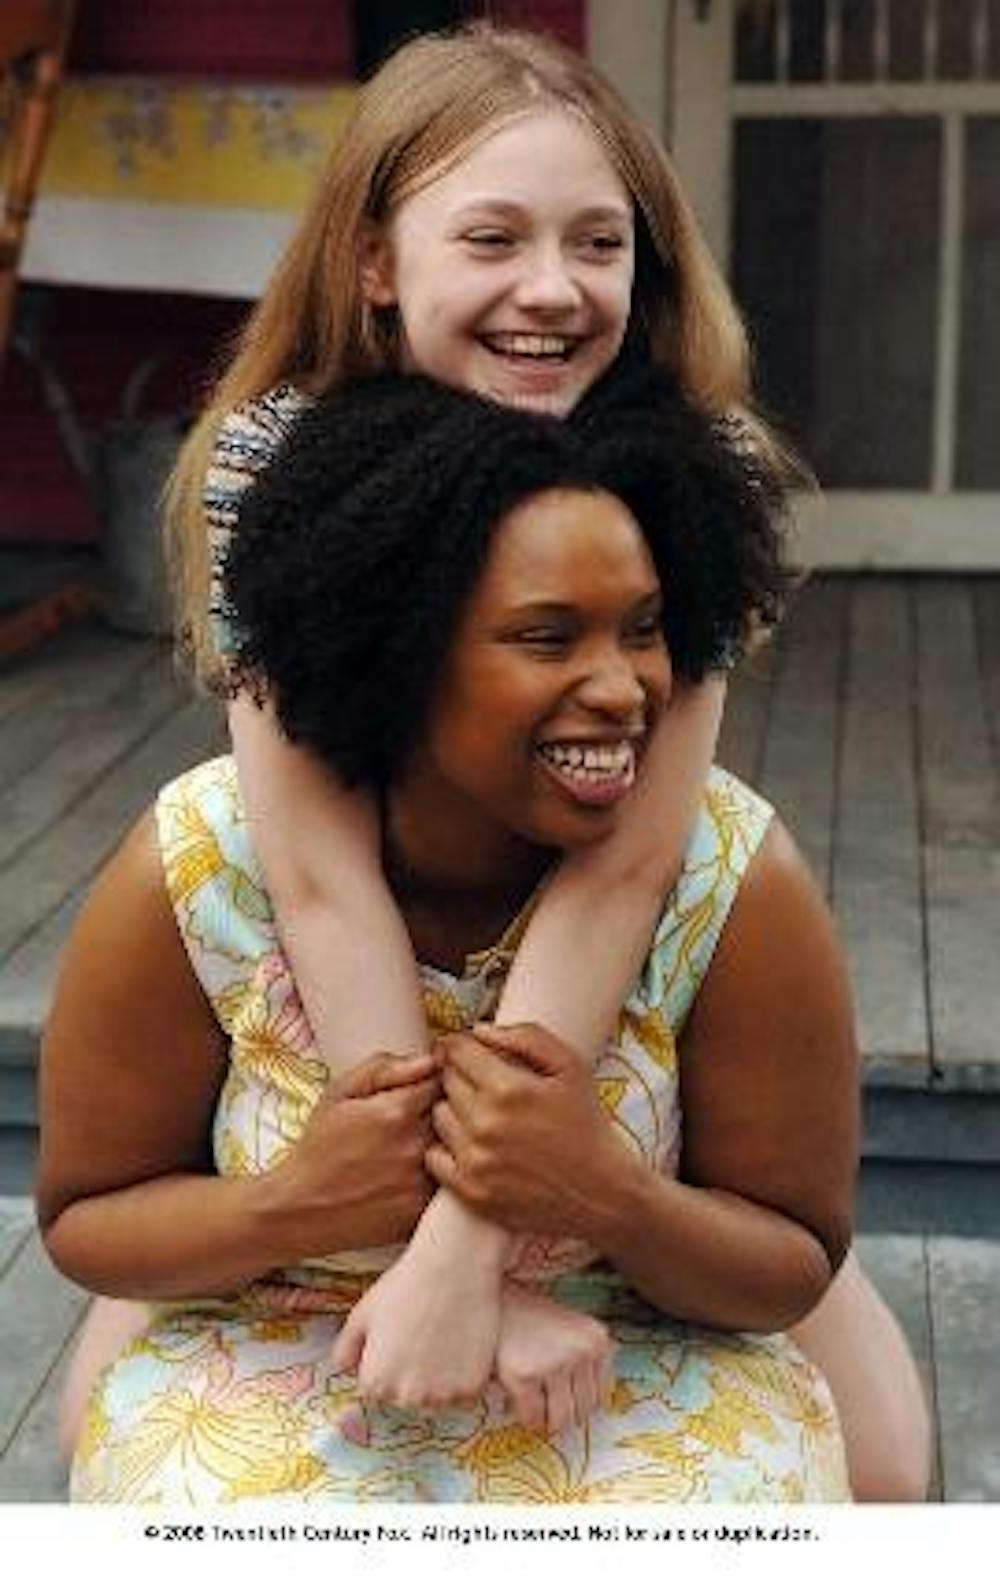 LIVING LIFE - Dakota Fanning and Jennifer Hudson (right) are among the all-star cast of "The Secret Life of Bees." The film, also starring Queen Latifah (below) and Alicia Keys, details the life of runaway Lily Owens (Fanning) as she is taken in by trio o